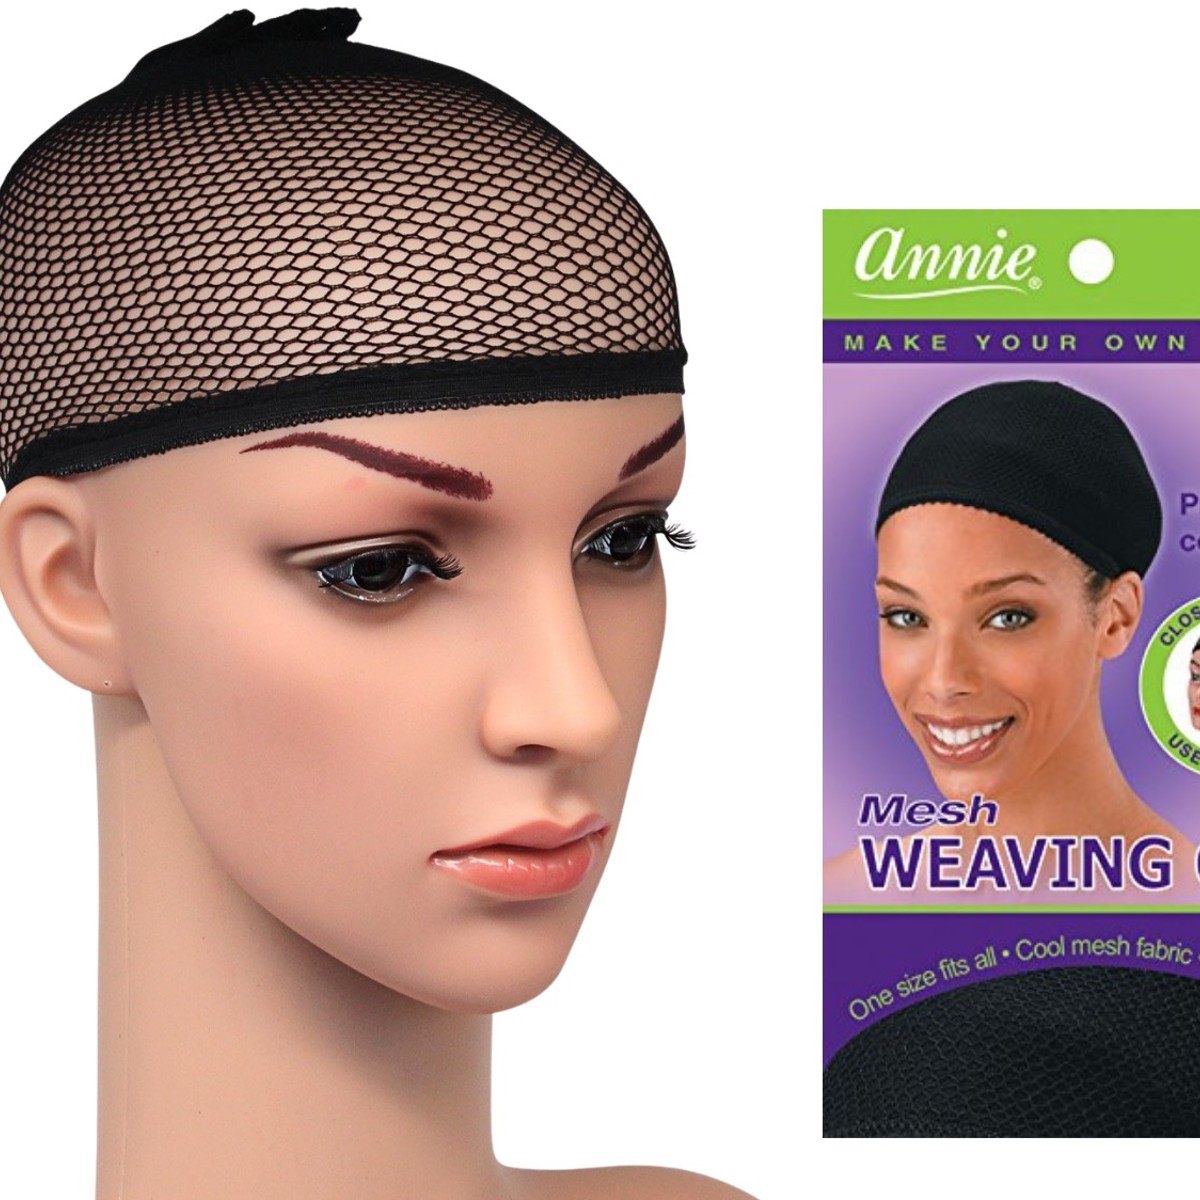 Why A Net Cap Is Used For Weave Sew-Ins